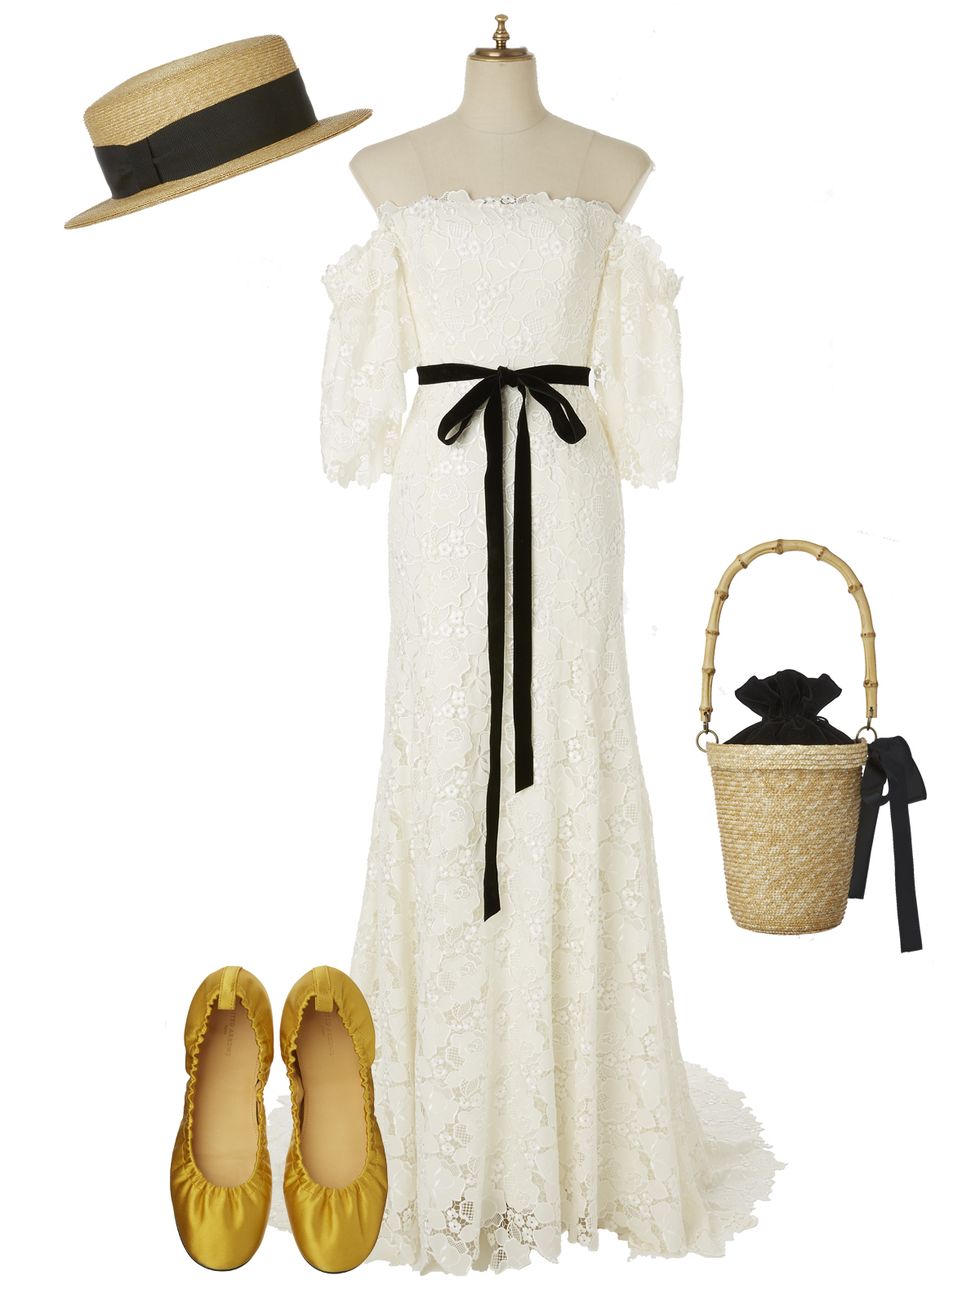 White, Clothing, Dress, Footwear, Beige, Costume, Robe, Outerwear, Gown, Costume design, 